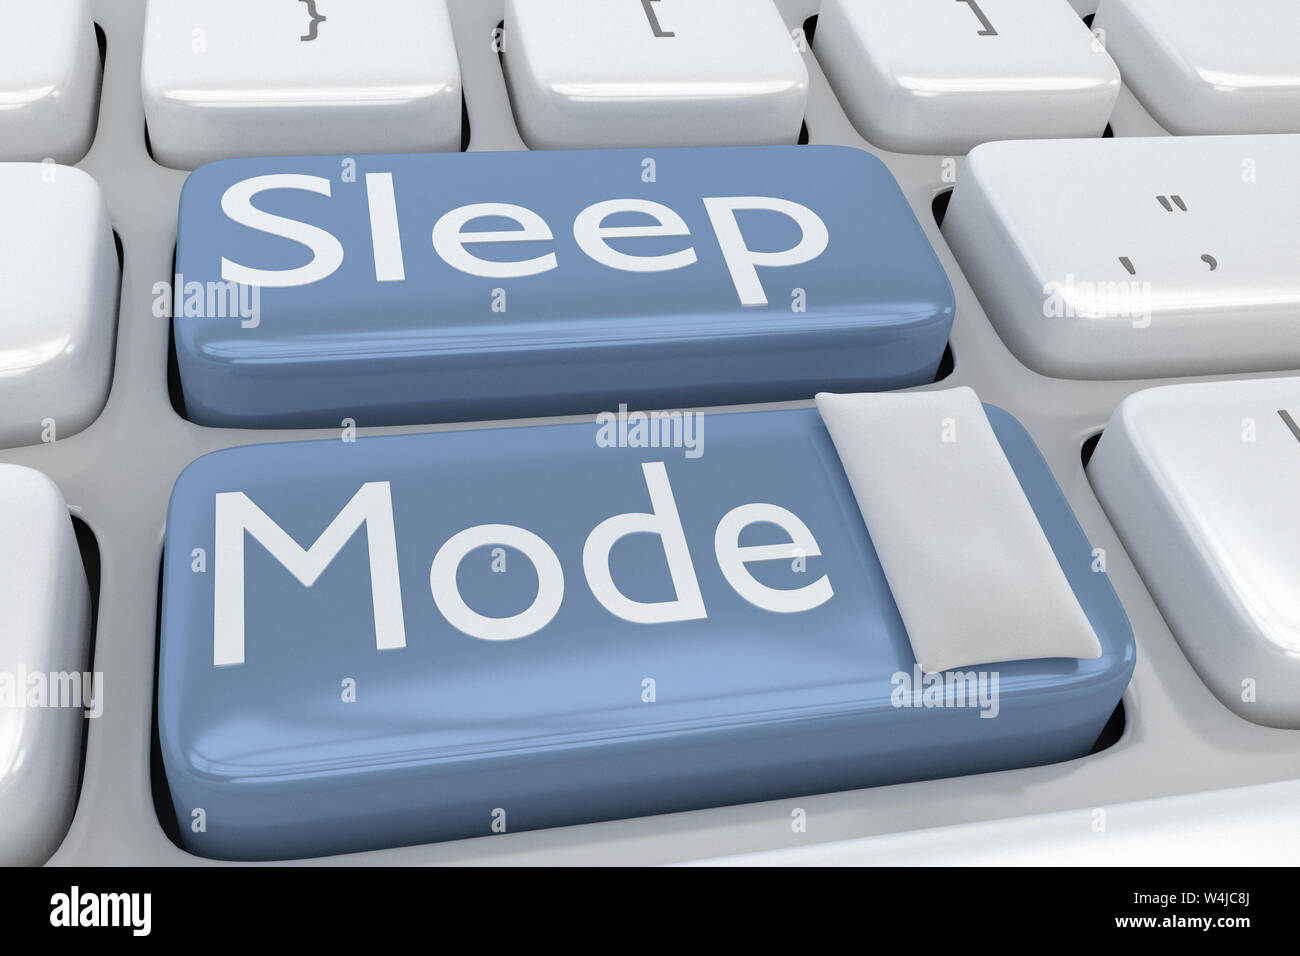 3D illustration of computer keyboard with the script Sleep Mode on two buttons, and a pillow on one of these buttons. Stock Photo